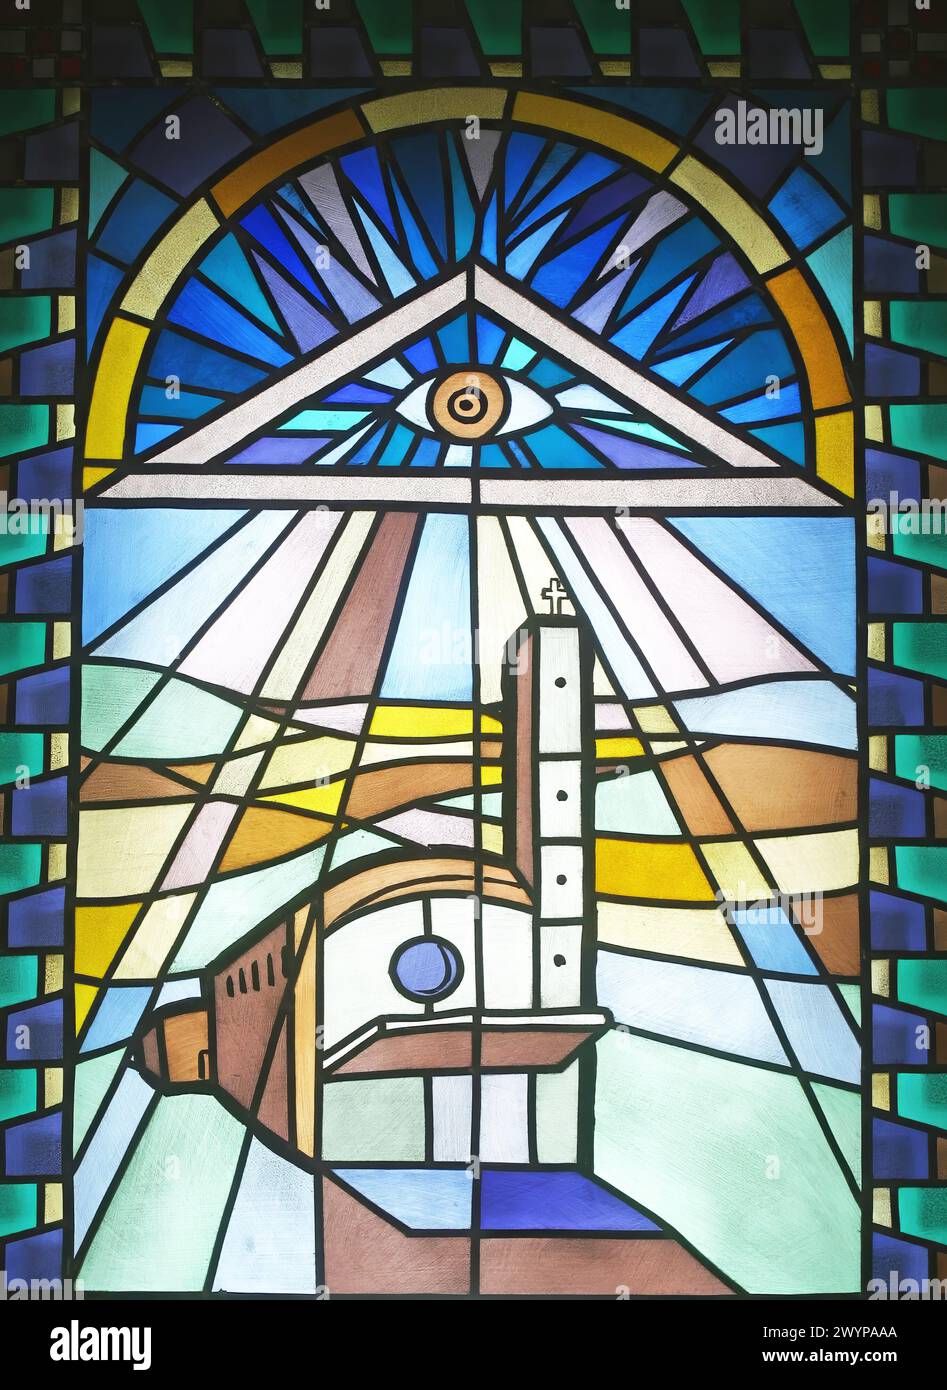 Stained glass window in the parish church of the Exaltation of the Holy Cross in Kerestinec, Croatia Stock Photo